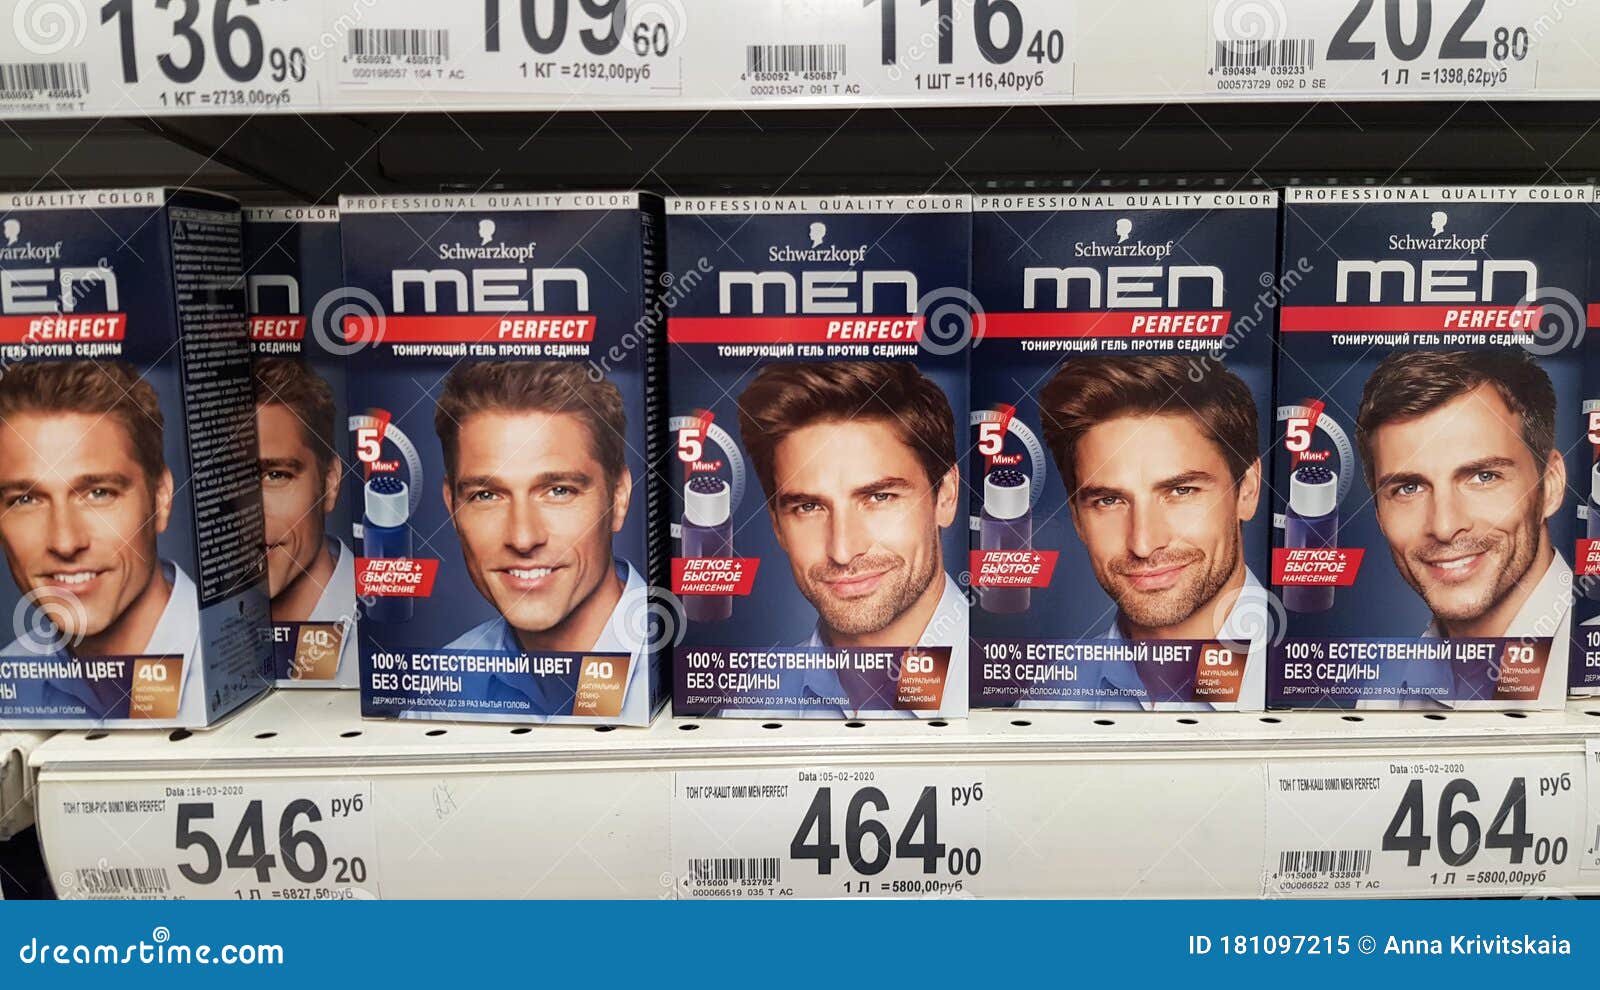 7. "The Best Men's Hair Dye for a Natural-Looking Blonde Color" - wide 8